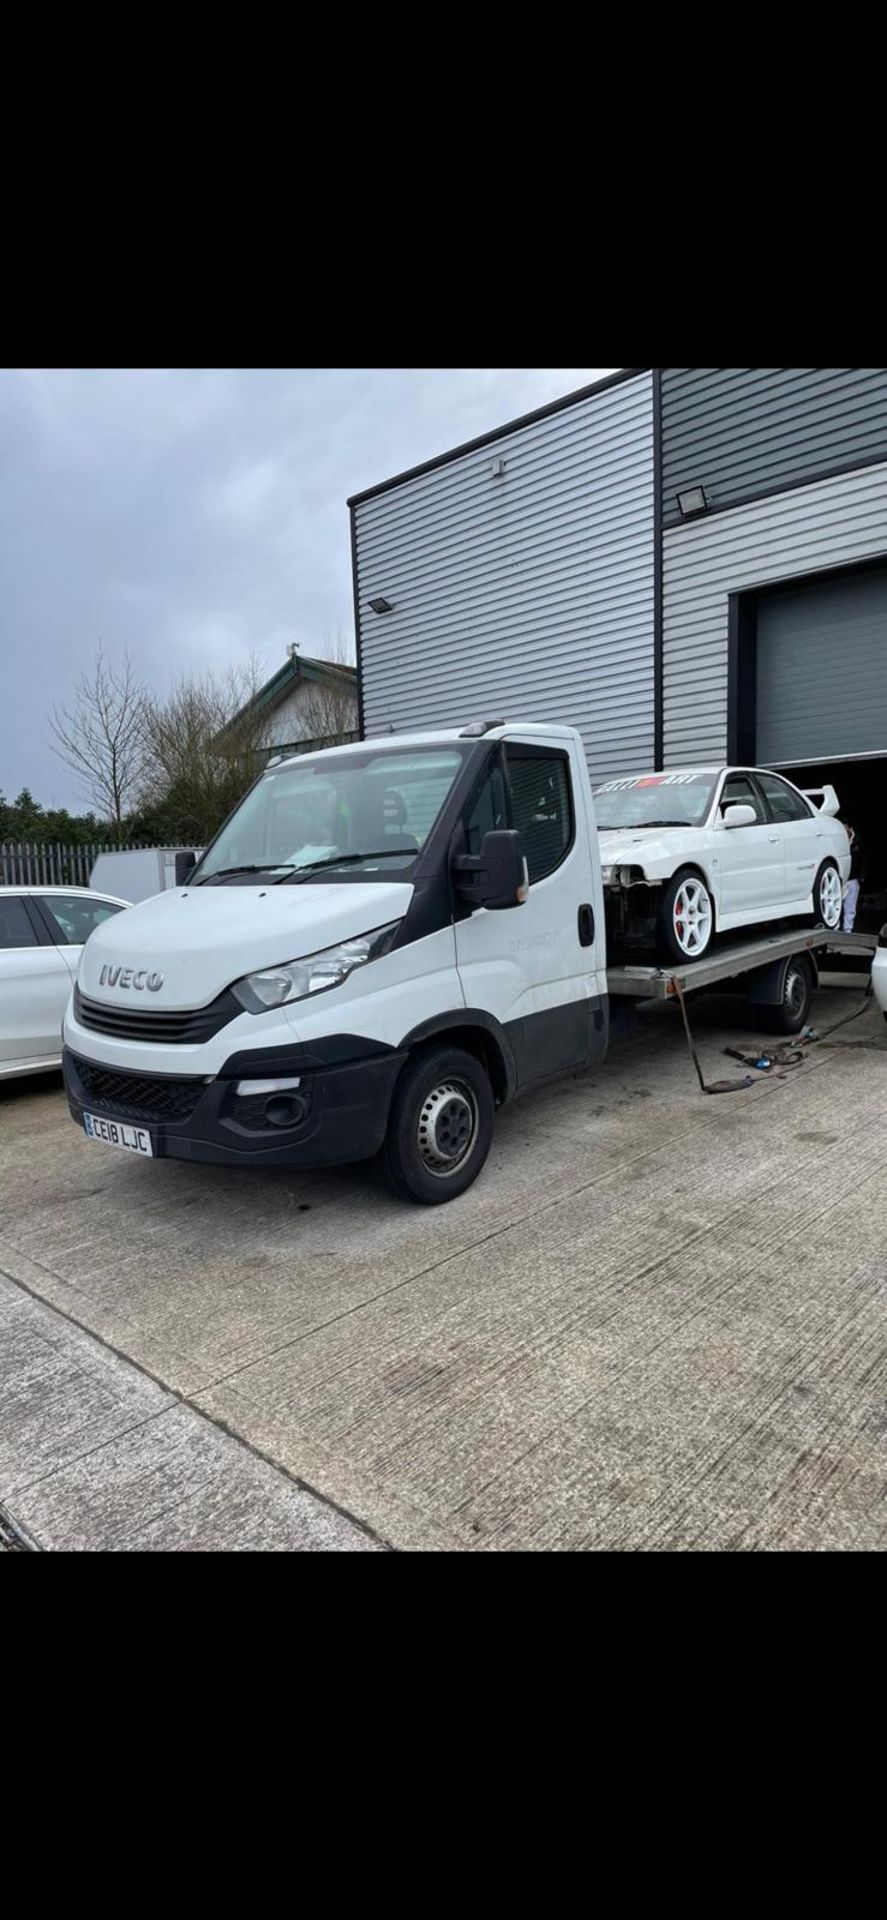 2018 (18) IVECO DAILY RECOVERY TRUCK CAR TRANSPORTER, 64,500 WARRANTED MILES, 1750KG PLAYLOAD - Image 2 of 16